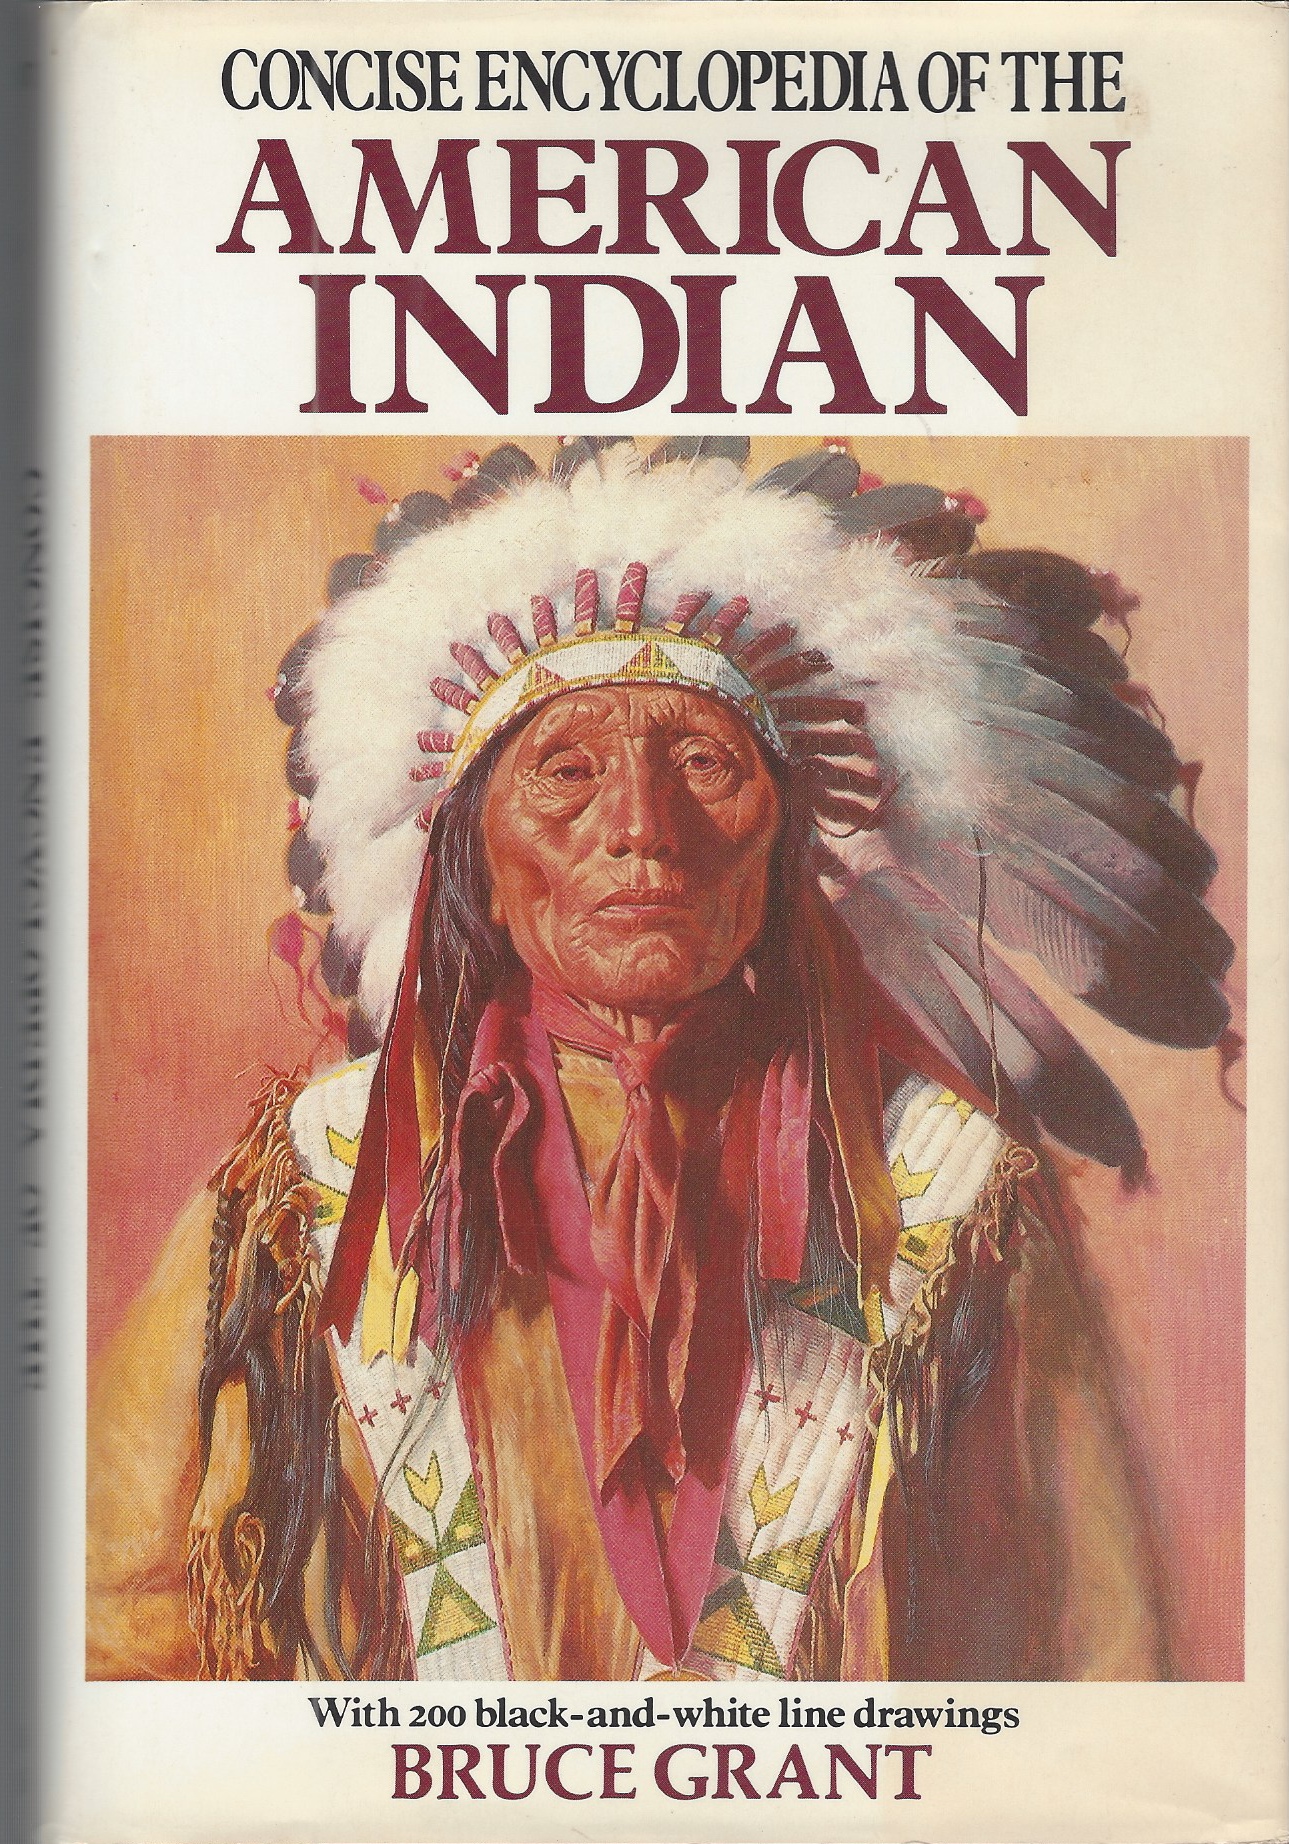 GRANT BRUCE - Concise Encyclopedia of the American Indian